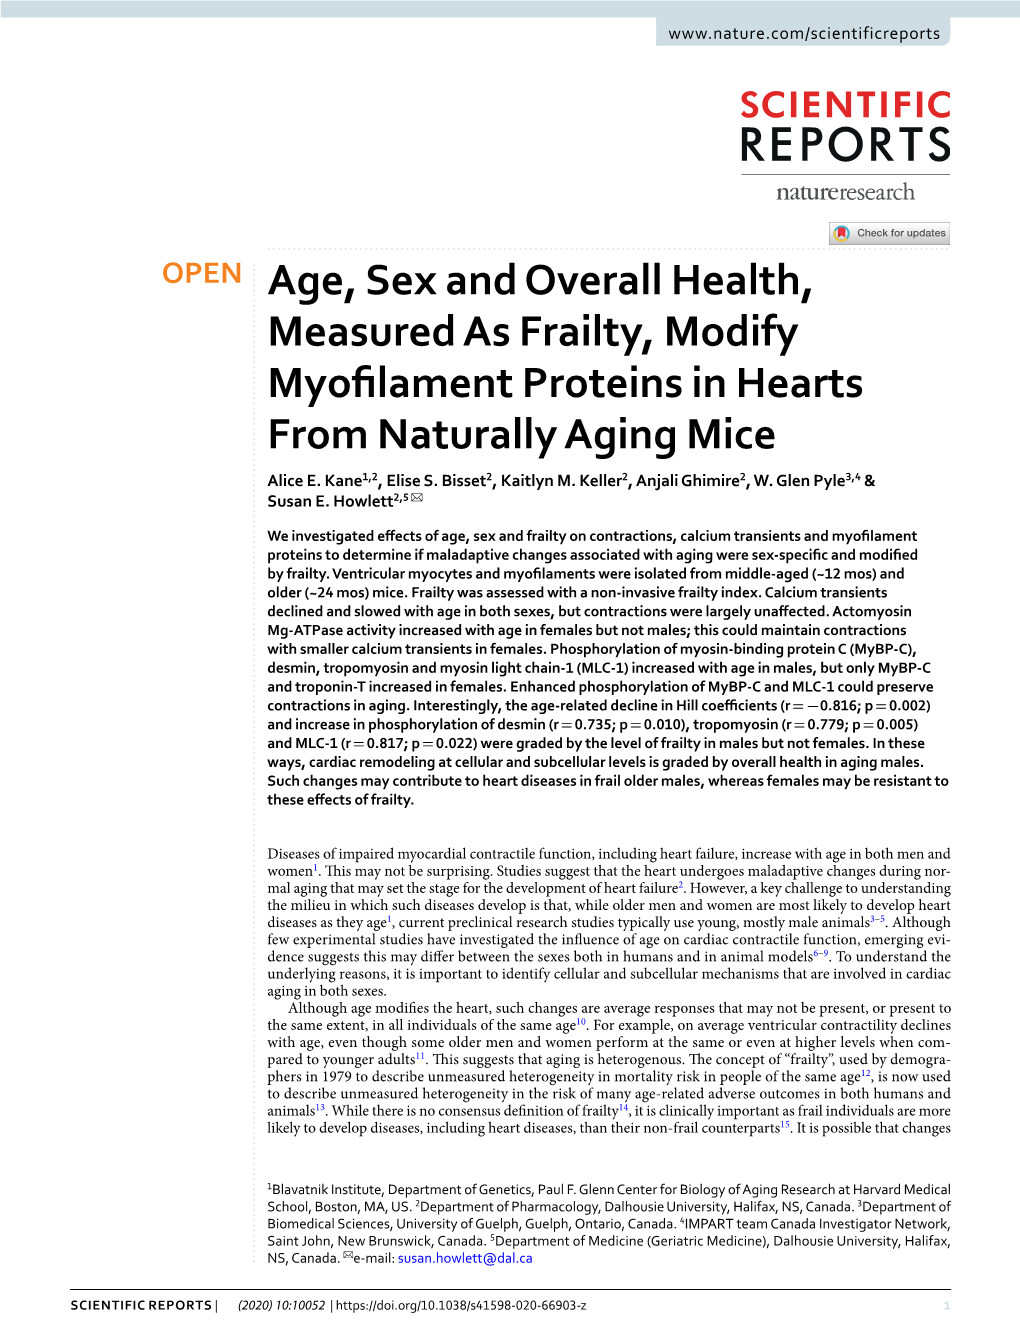 Age, Sex and Overall Health, Measured As Frailty, Modify Myofilament Proteins in Hearts from Naturally Aging Mice